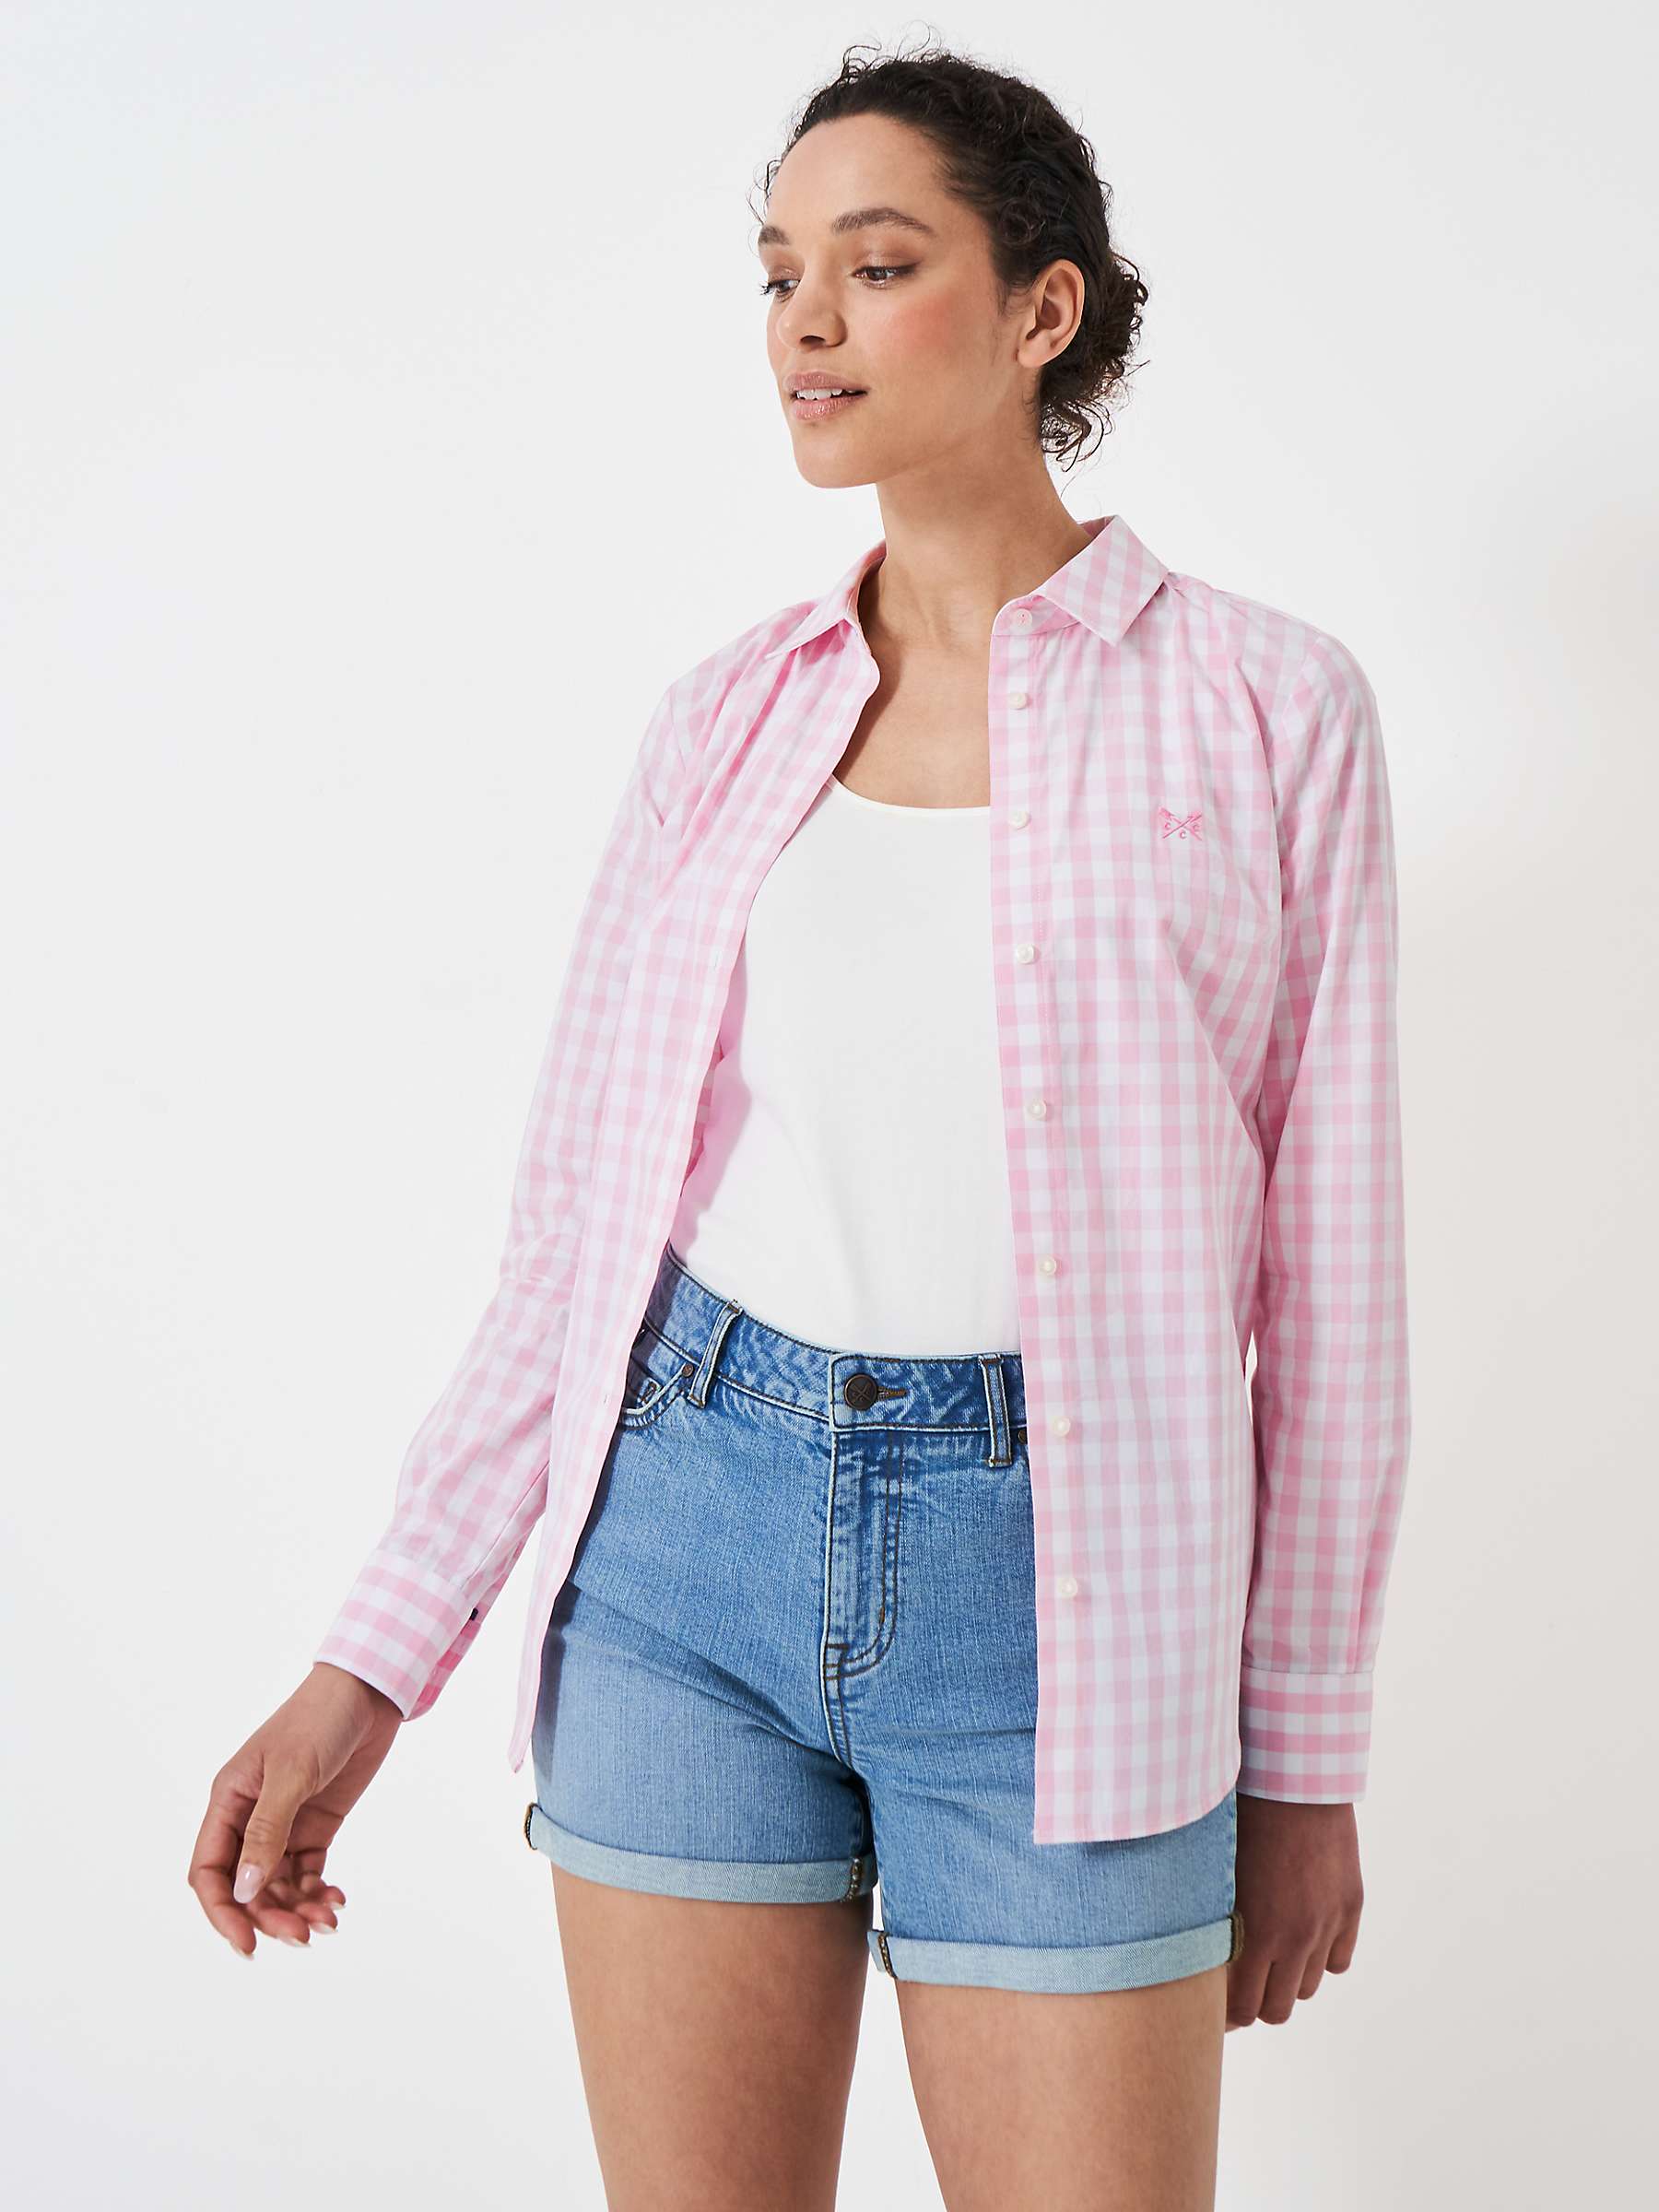 Buy Crew Clothing Classic Fit Gingham Shirt, Light Pink Online at johnlewis.com